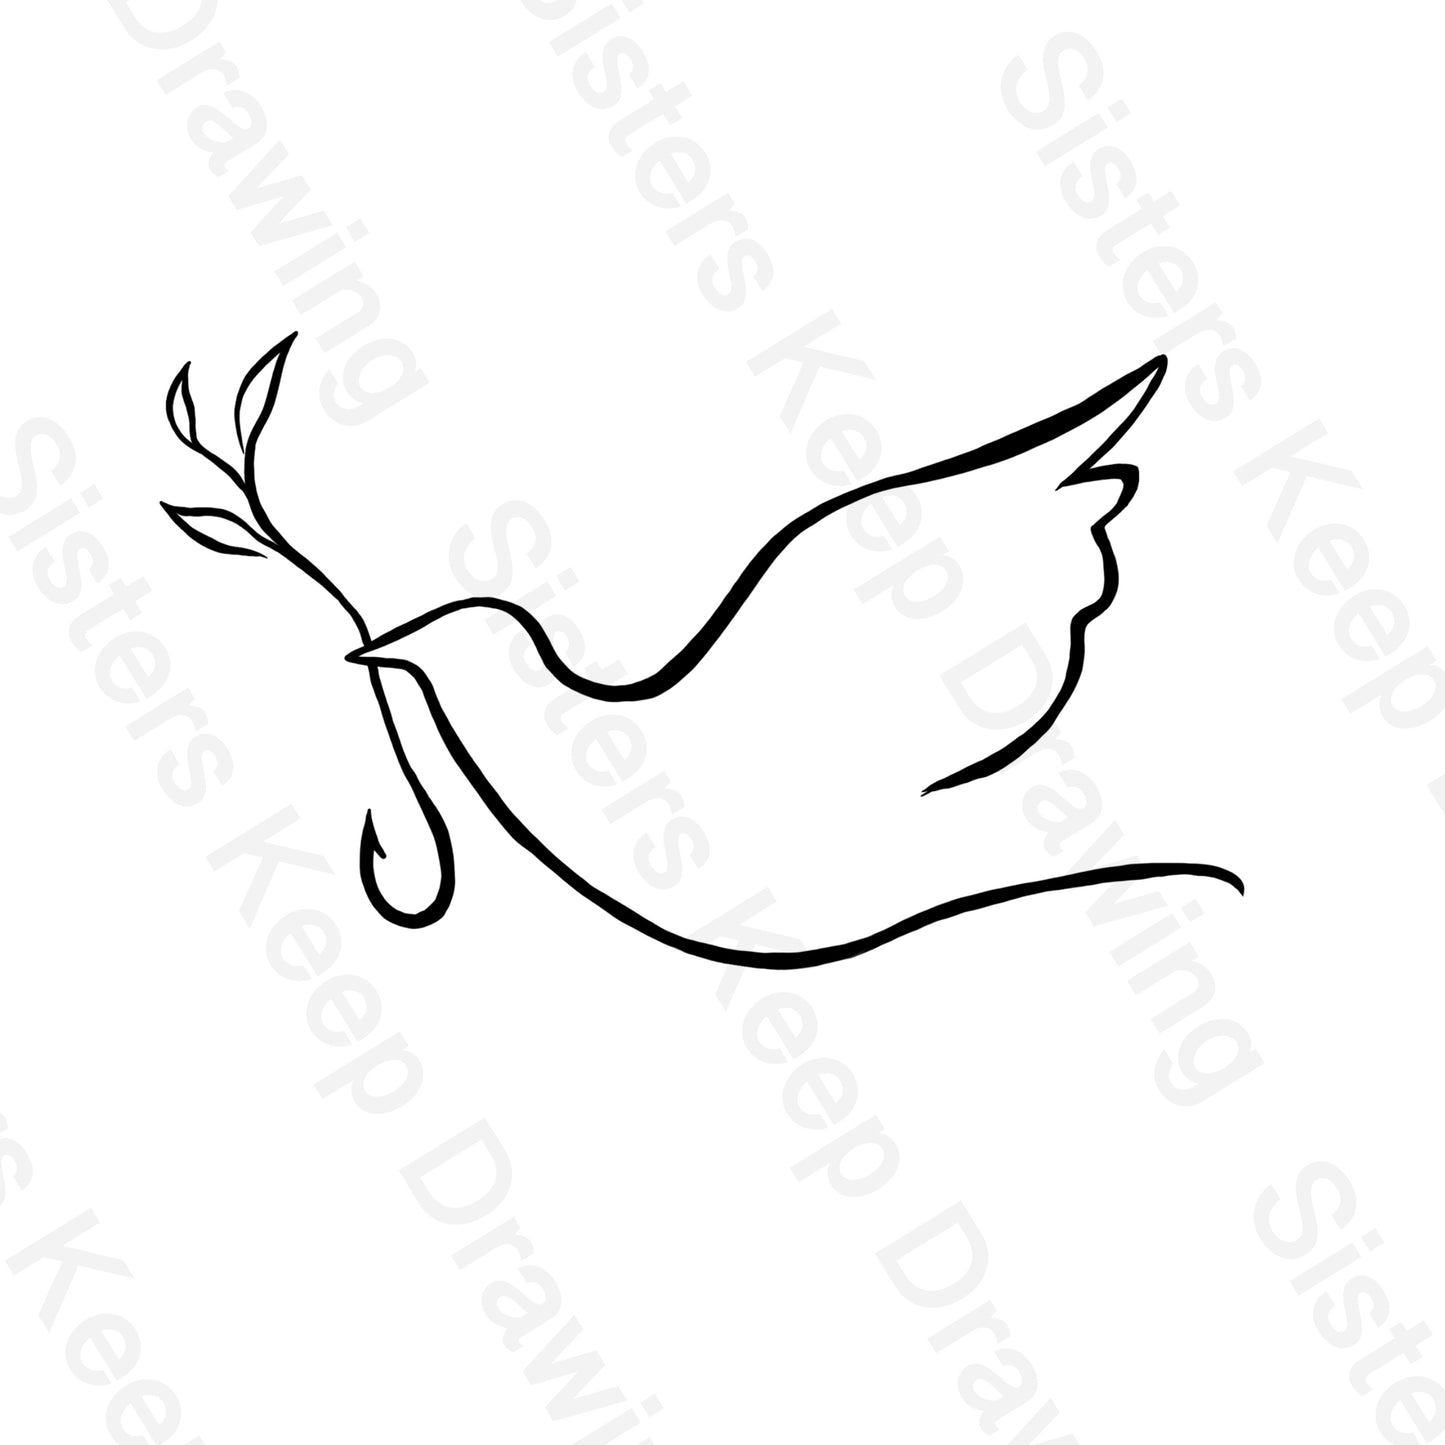 Dove with Fish Hook - Bible Themed - Chosen Inspired - Tattoo Transparent PNG- instant download digital printable artwork